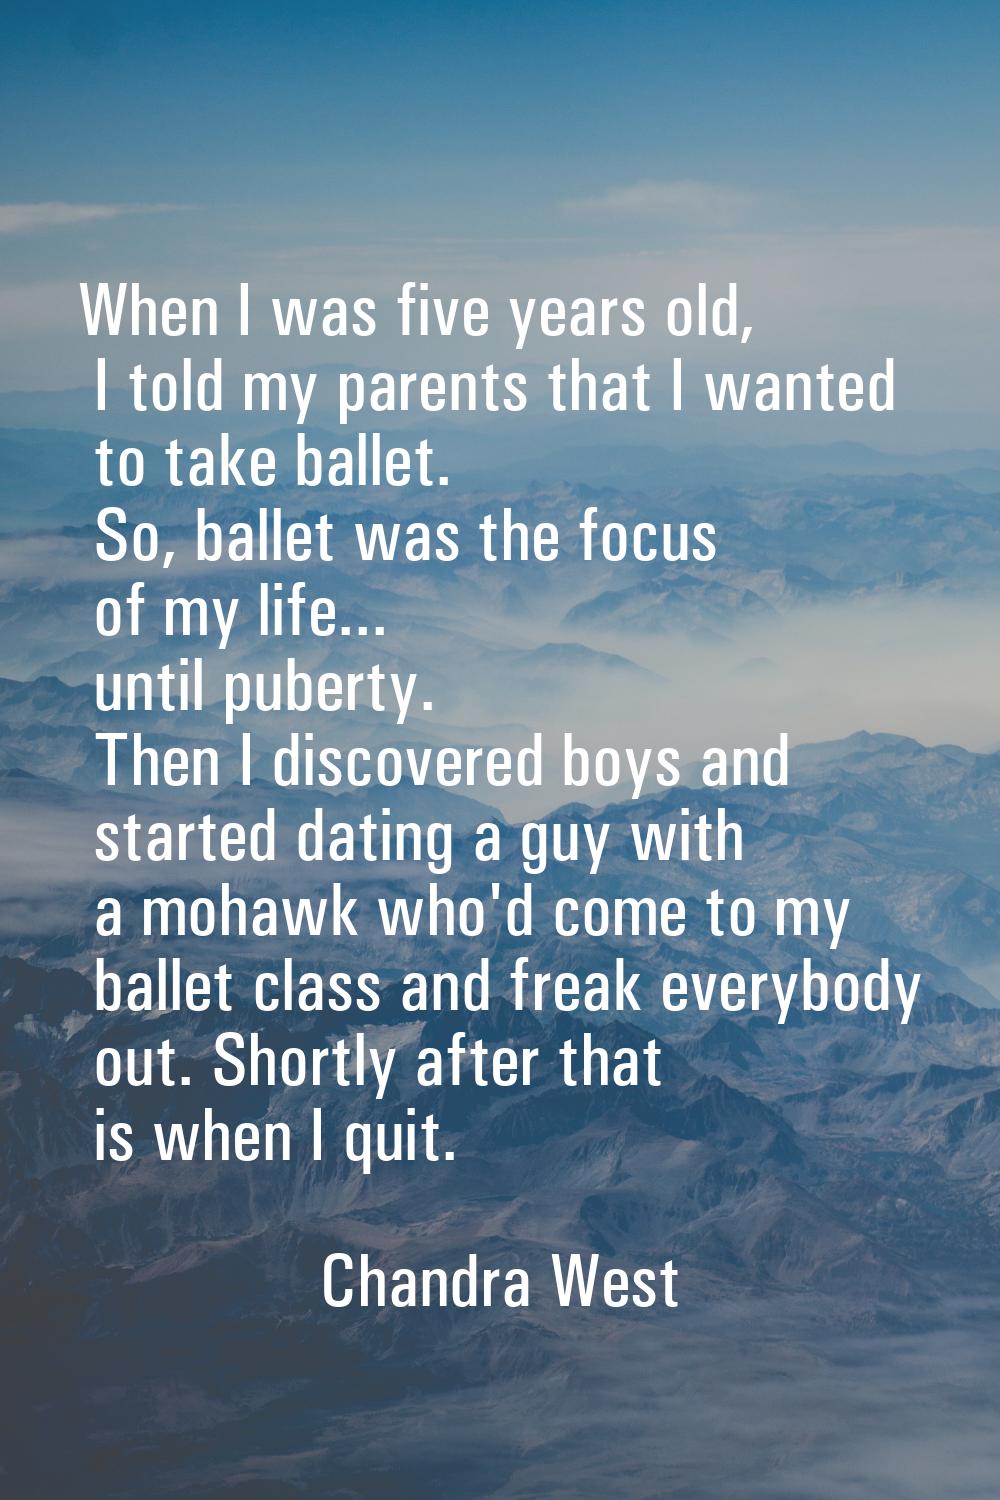 When I was five years old, I told my parents that I wanted to take ballet. So, ballet was the focus